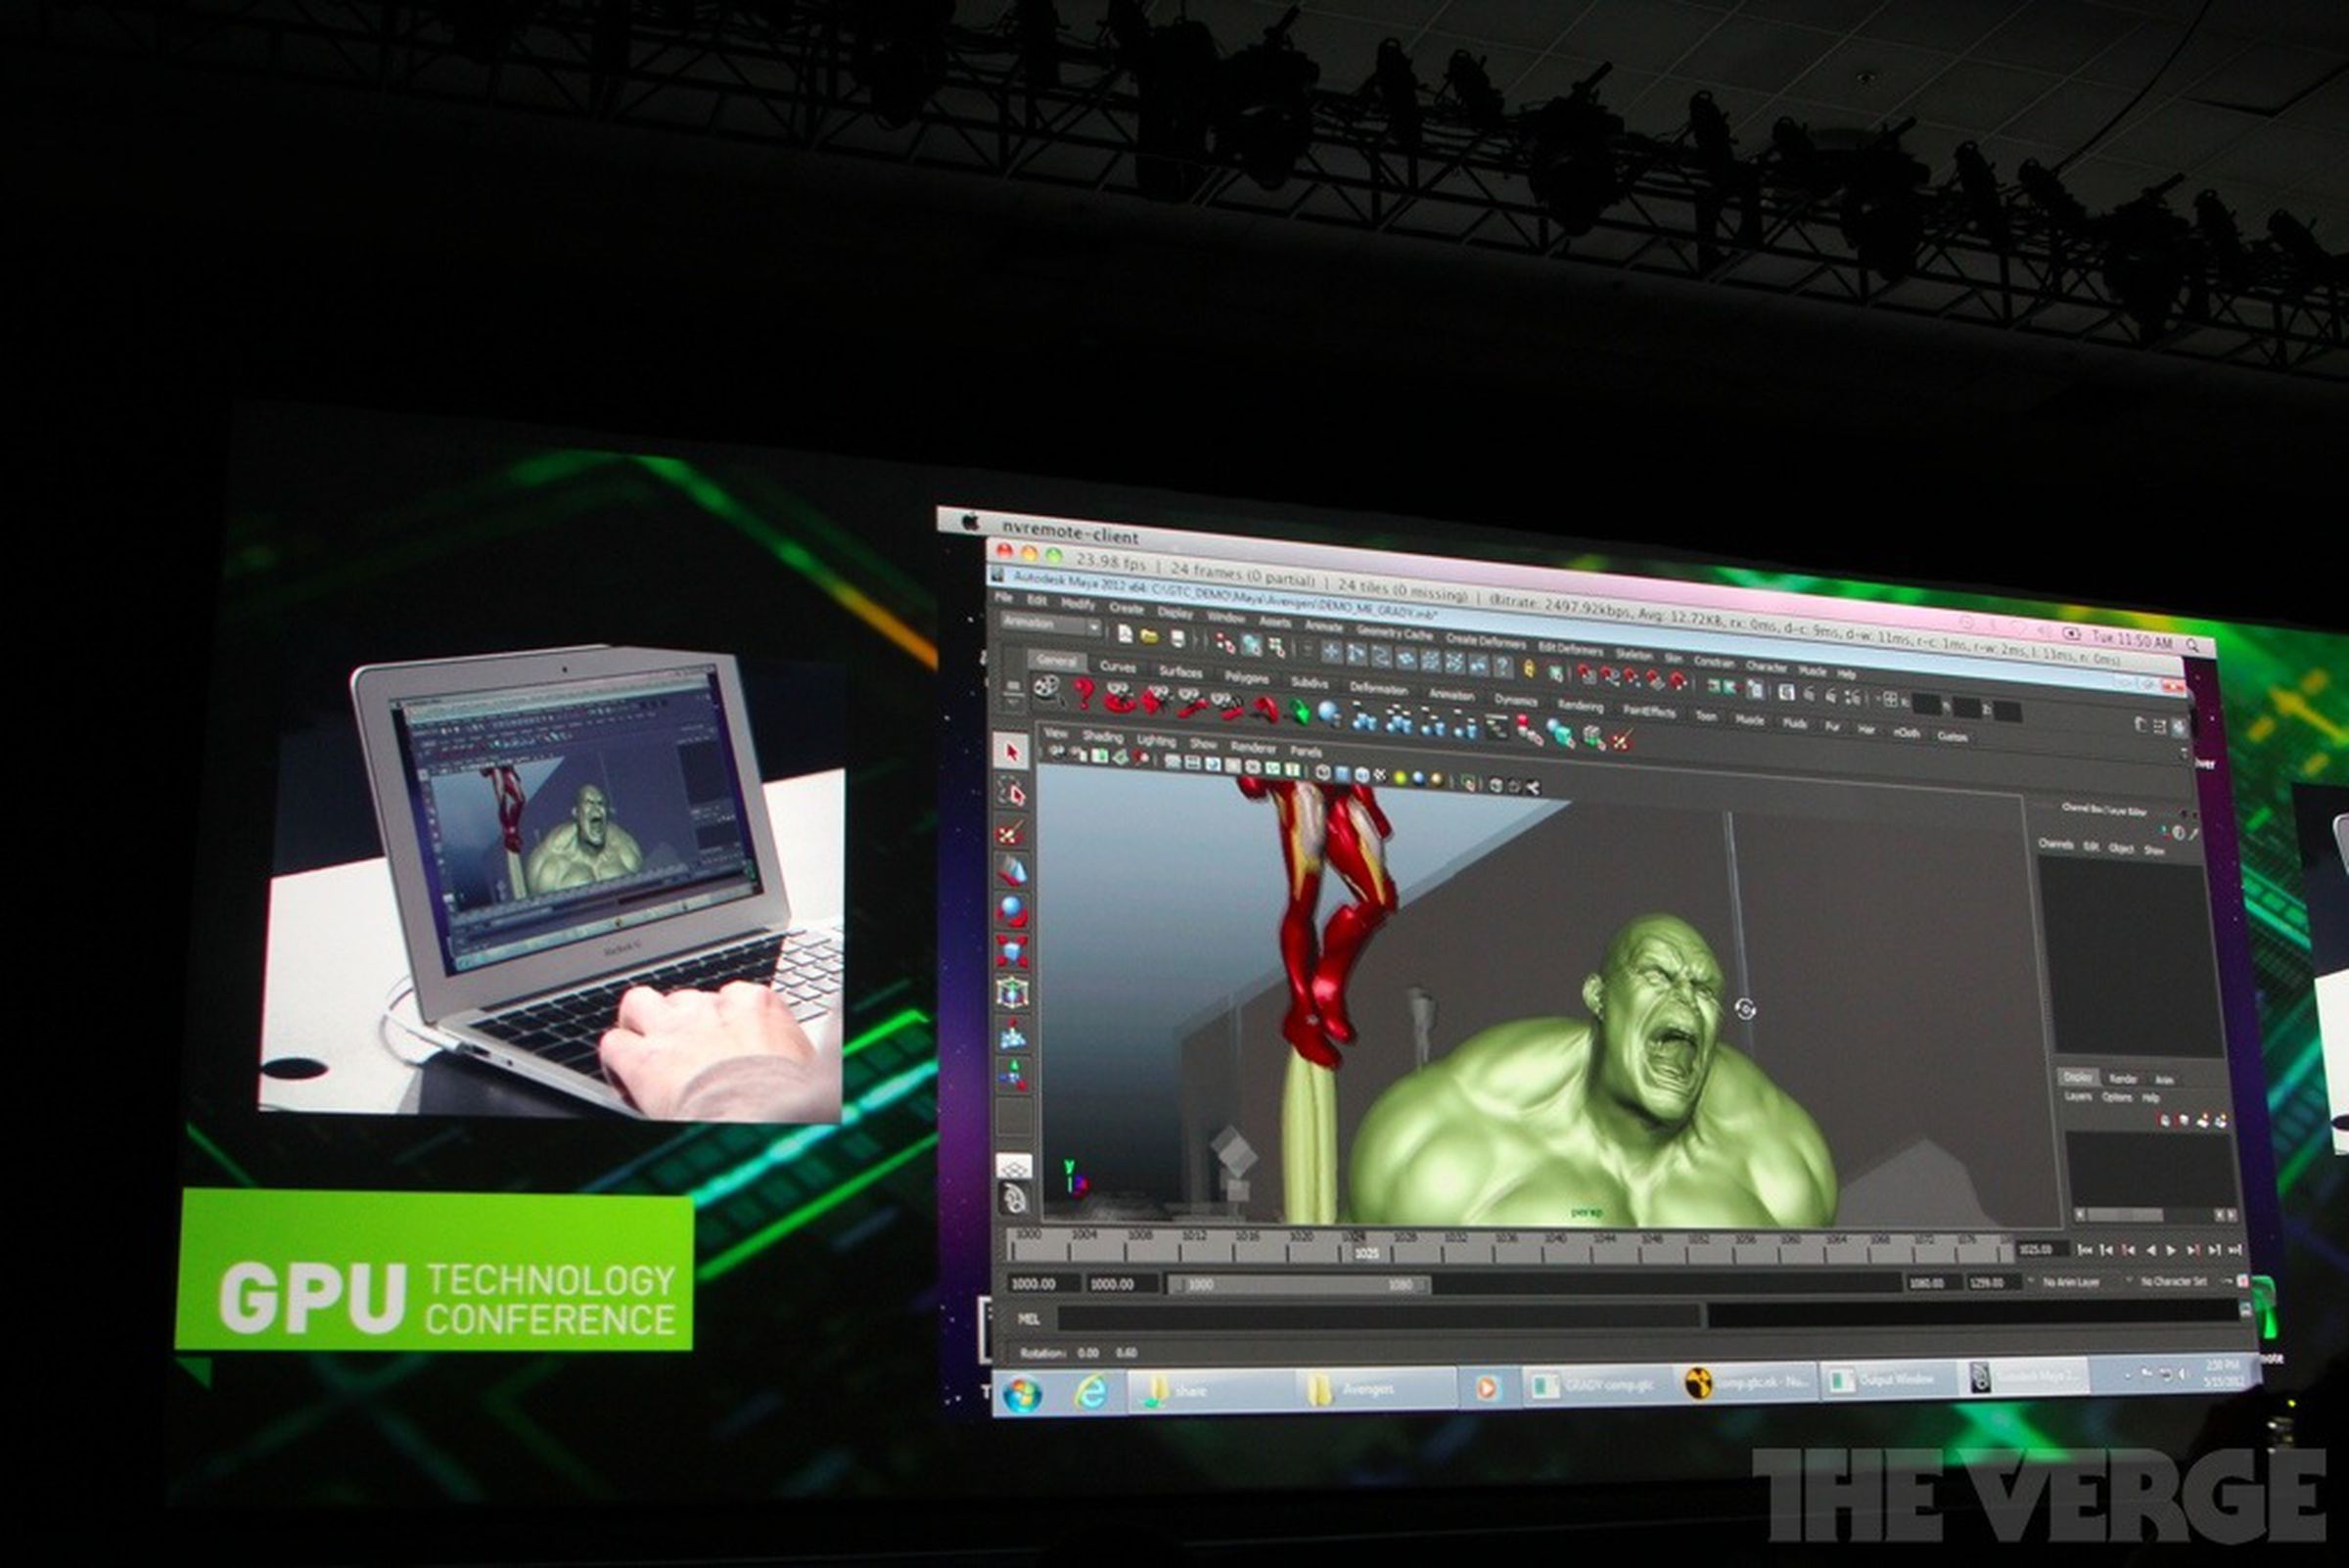 Nvidia's VDX virtualized GPU: pictures from GTC 2012